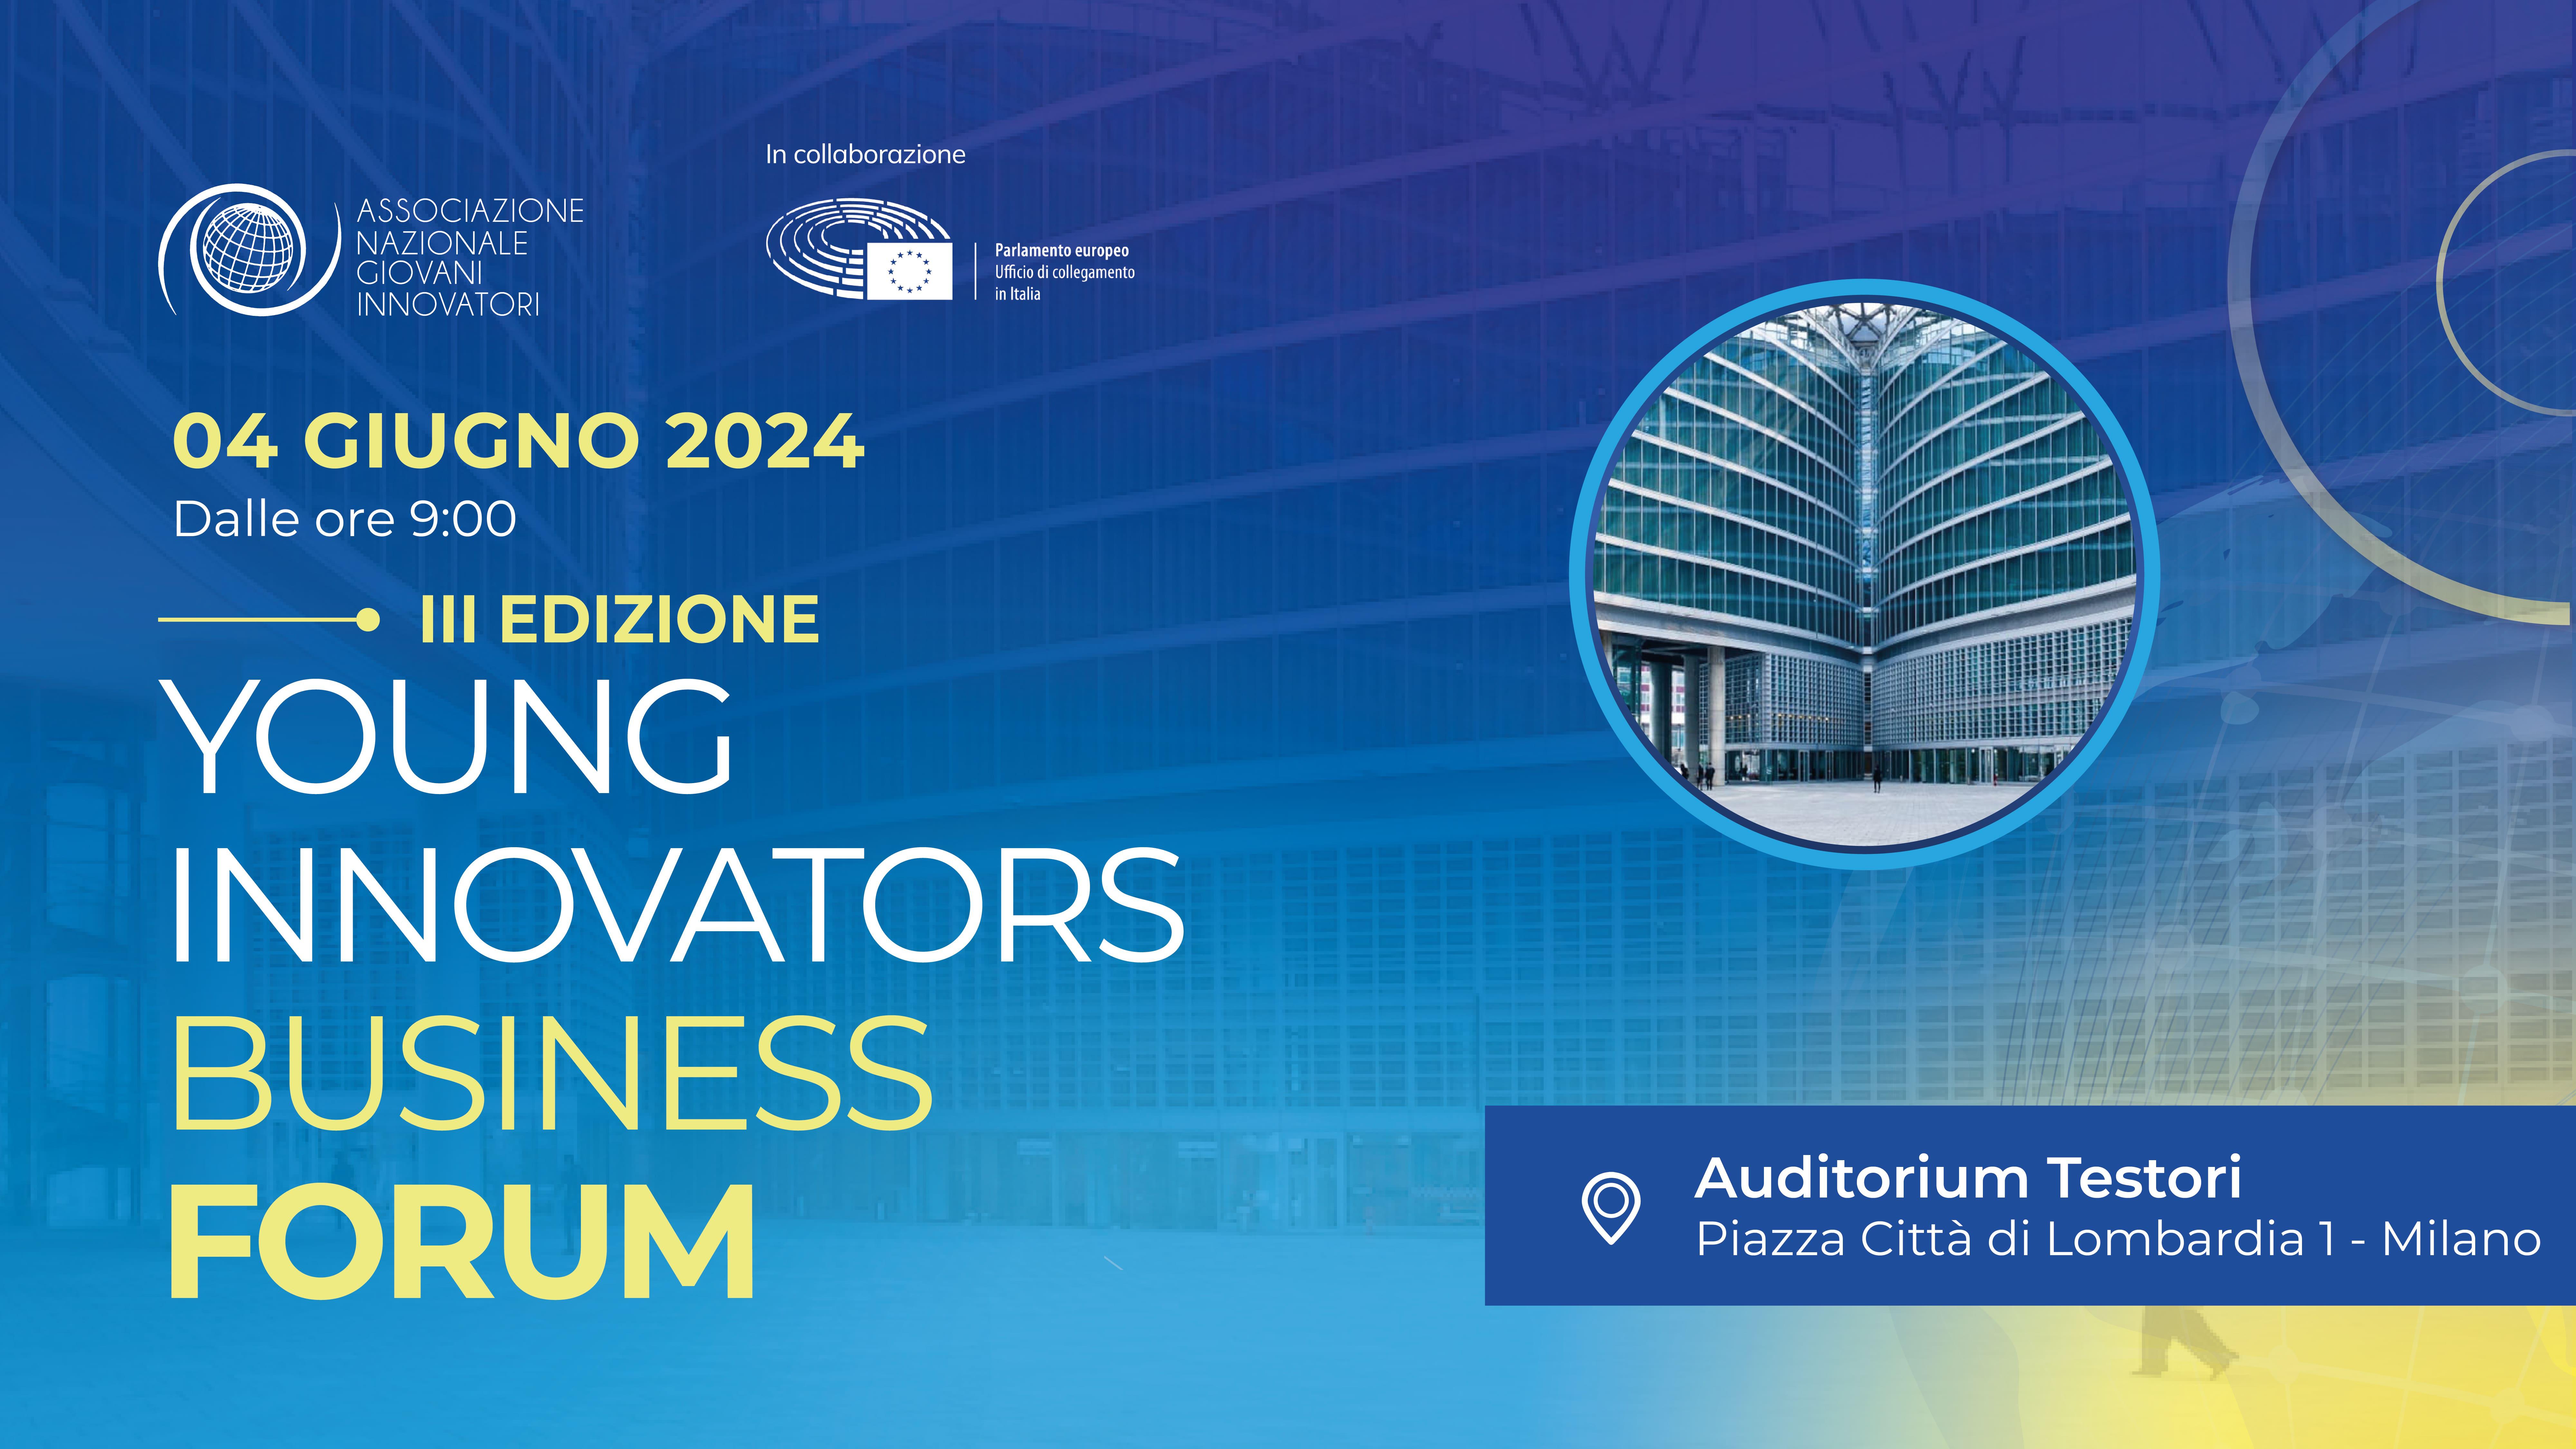 Milan hosts the third edition of The Young Innovators Business Forum: A Hub of Innovation